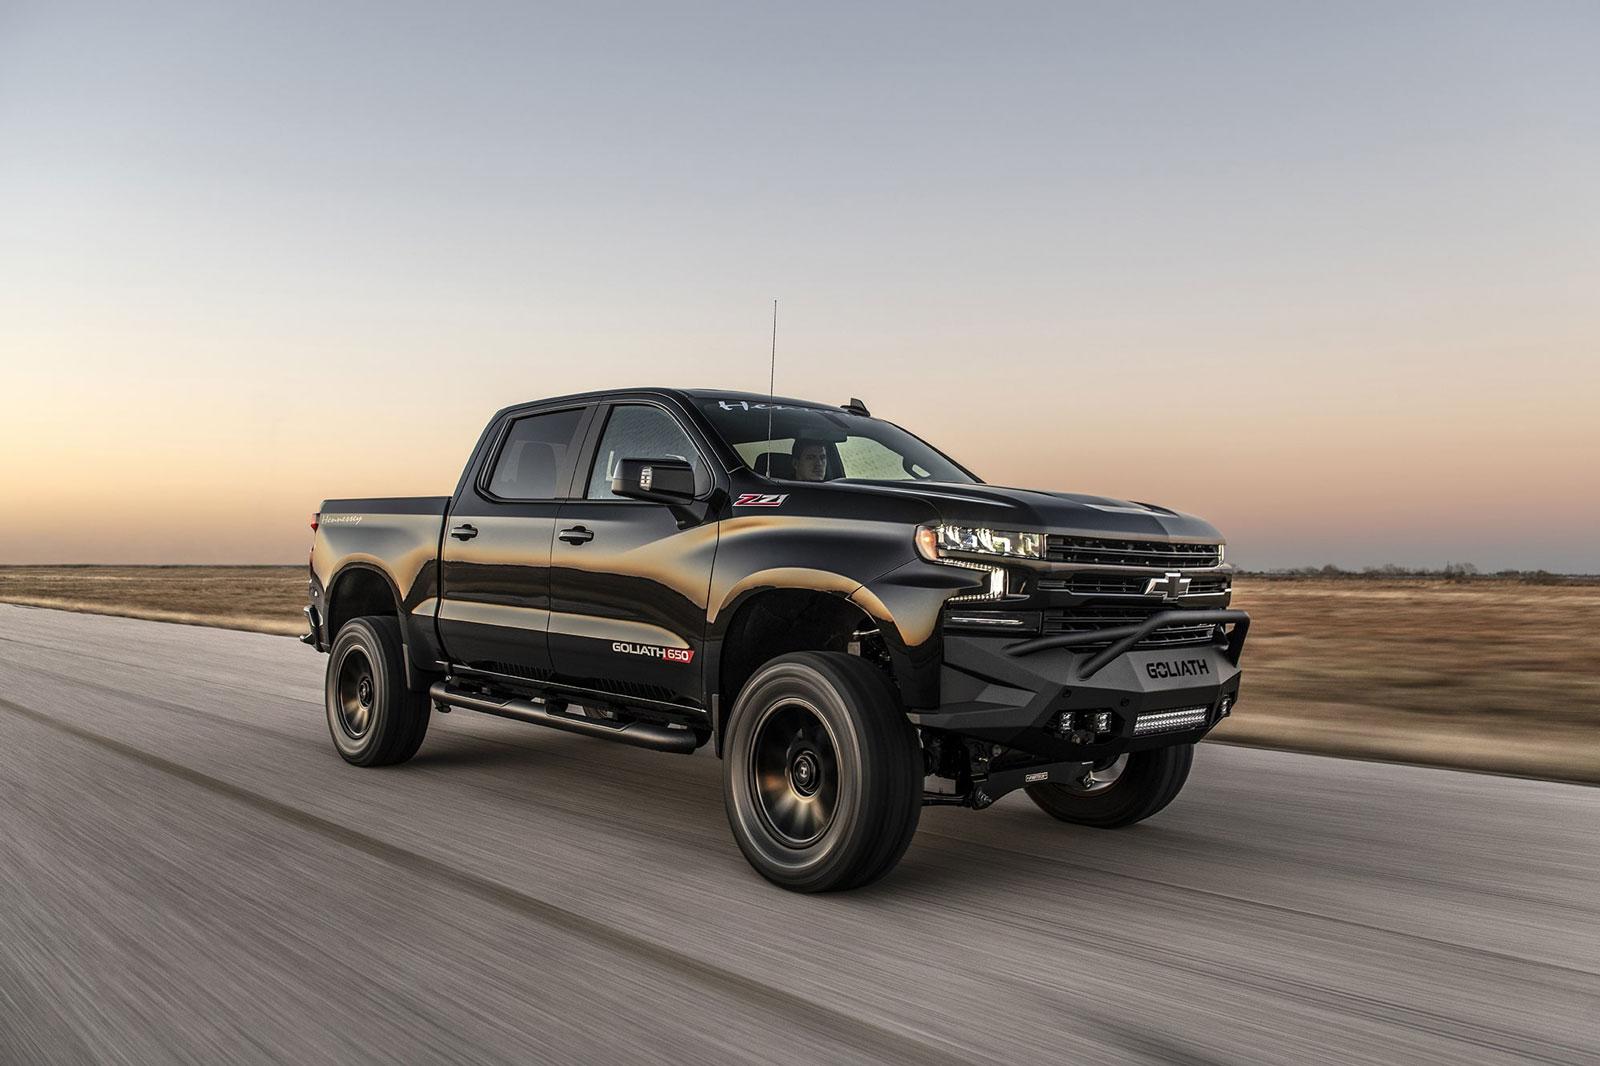 Shiny black Chevy Silverado with Hennessey Goliath  650 Supercharged upgrades, from front right